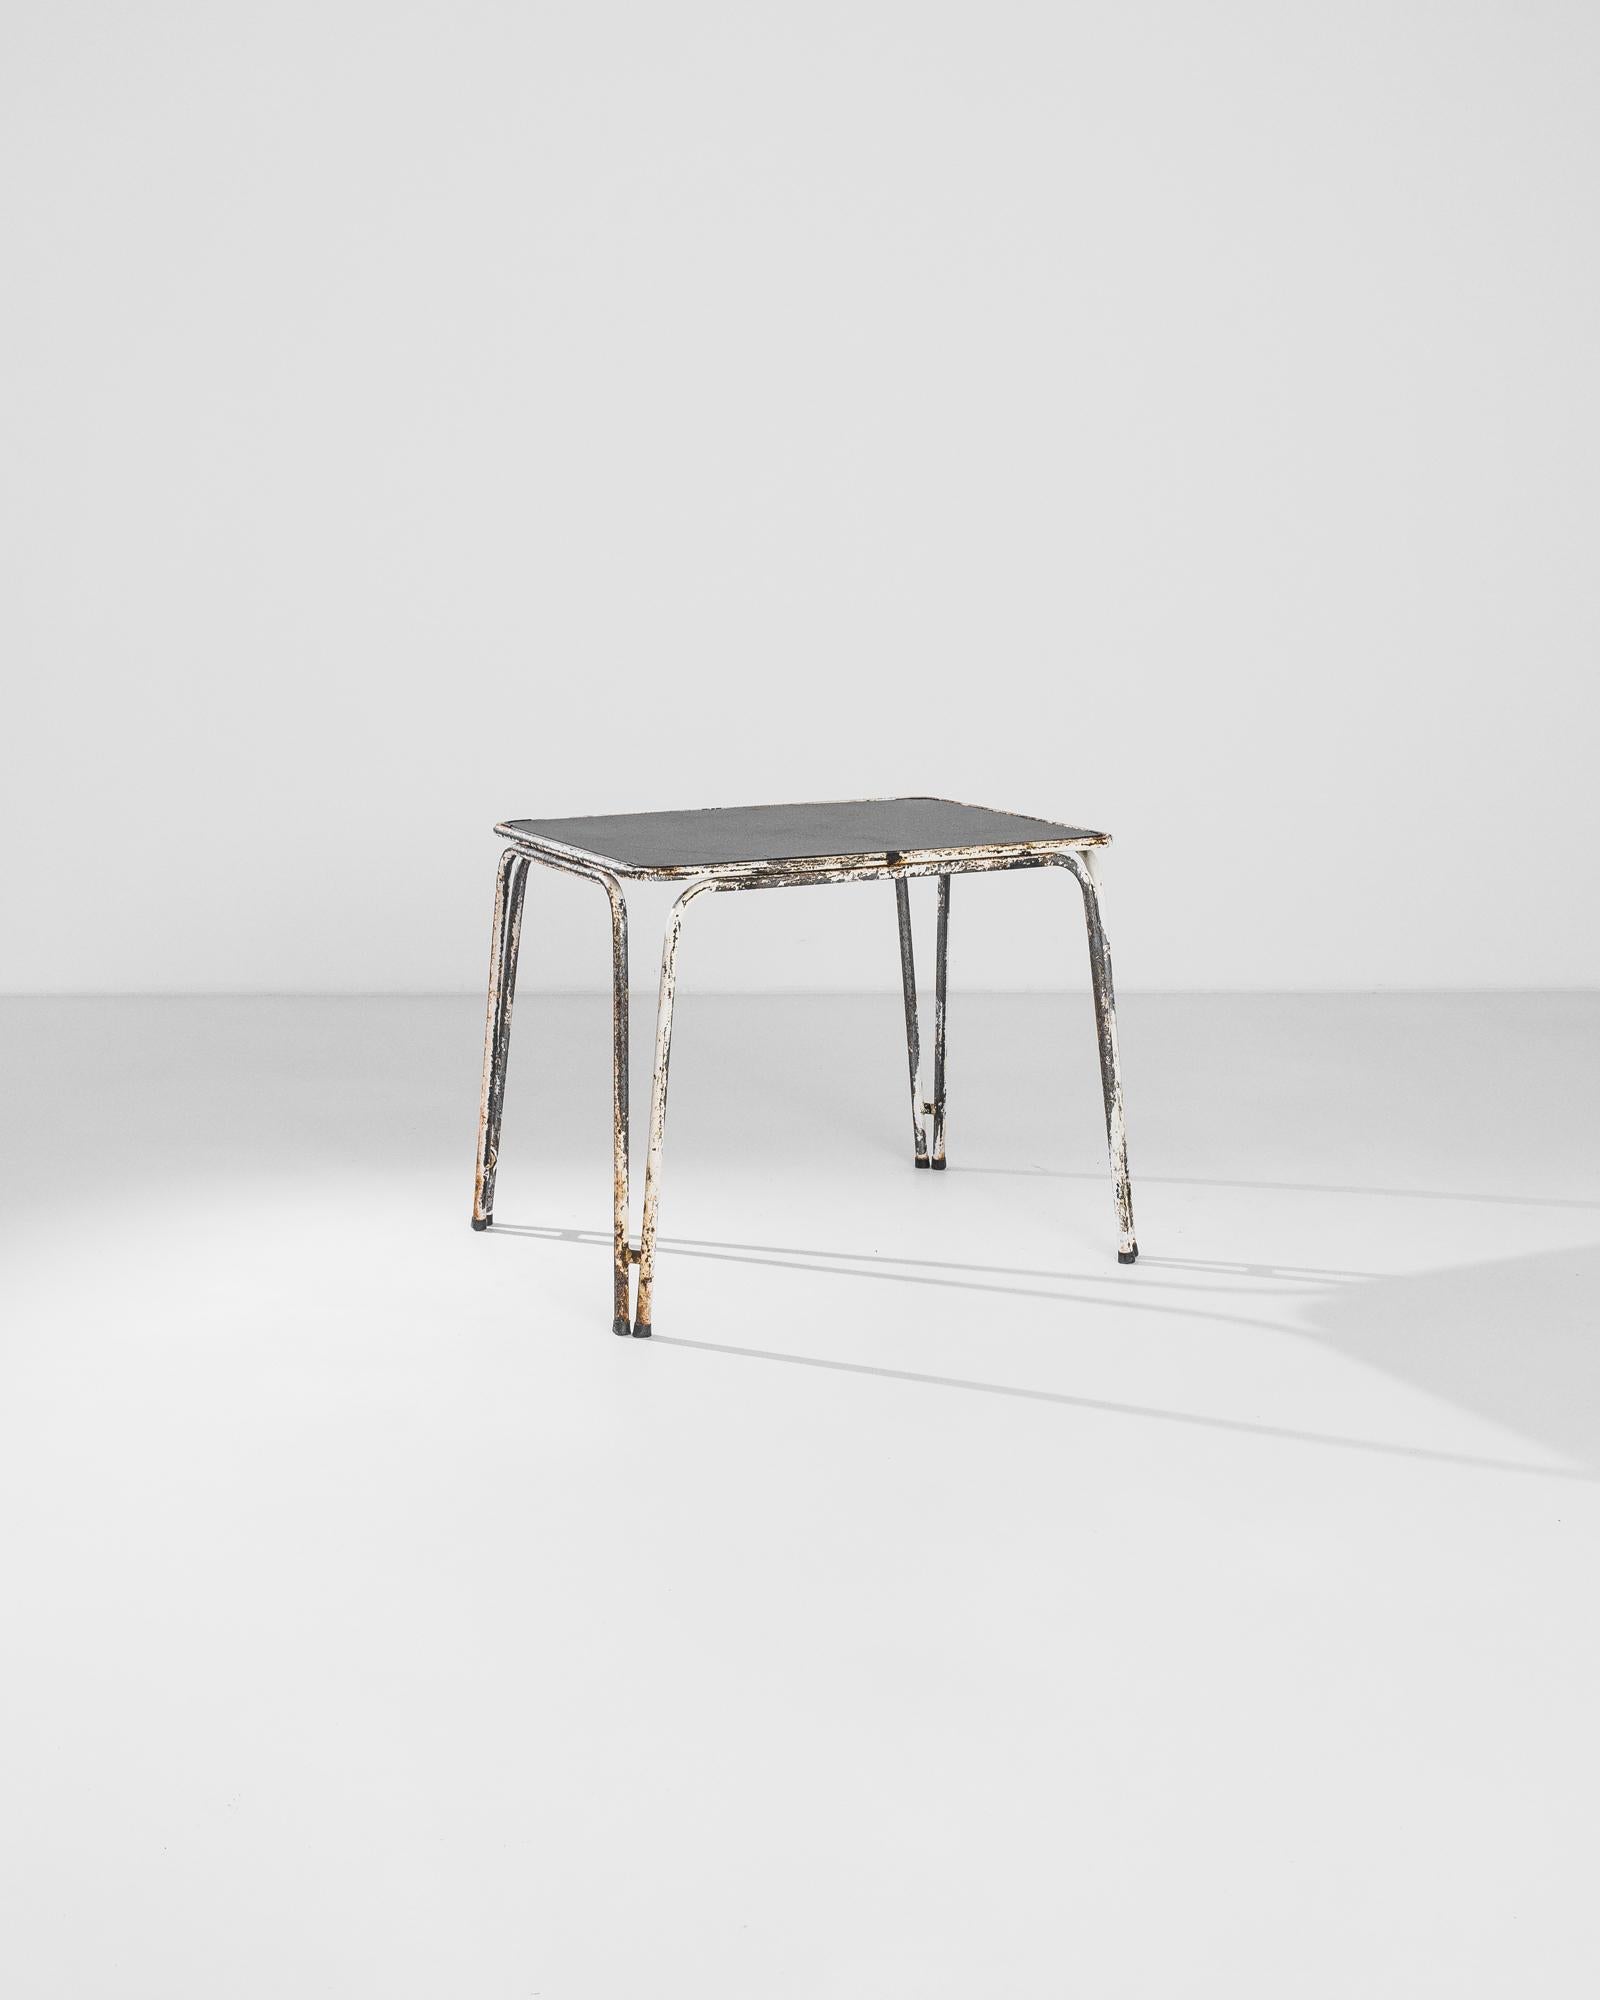 A metal garden table from France, produced circa 1960. White patinated bent metal legs support a black tabletop in this table built for relaxation. Imagine: lounging under the sun in tennis whites, not a court in sight, as condensation from an